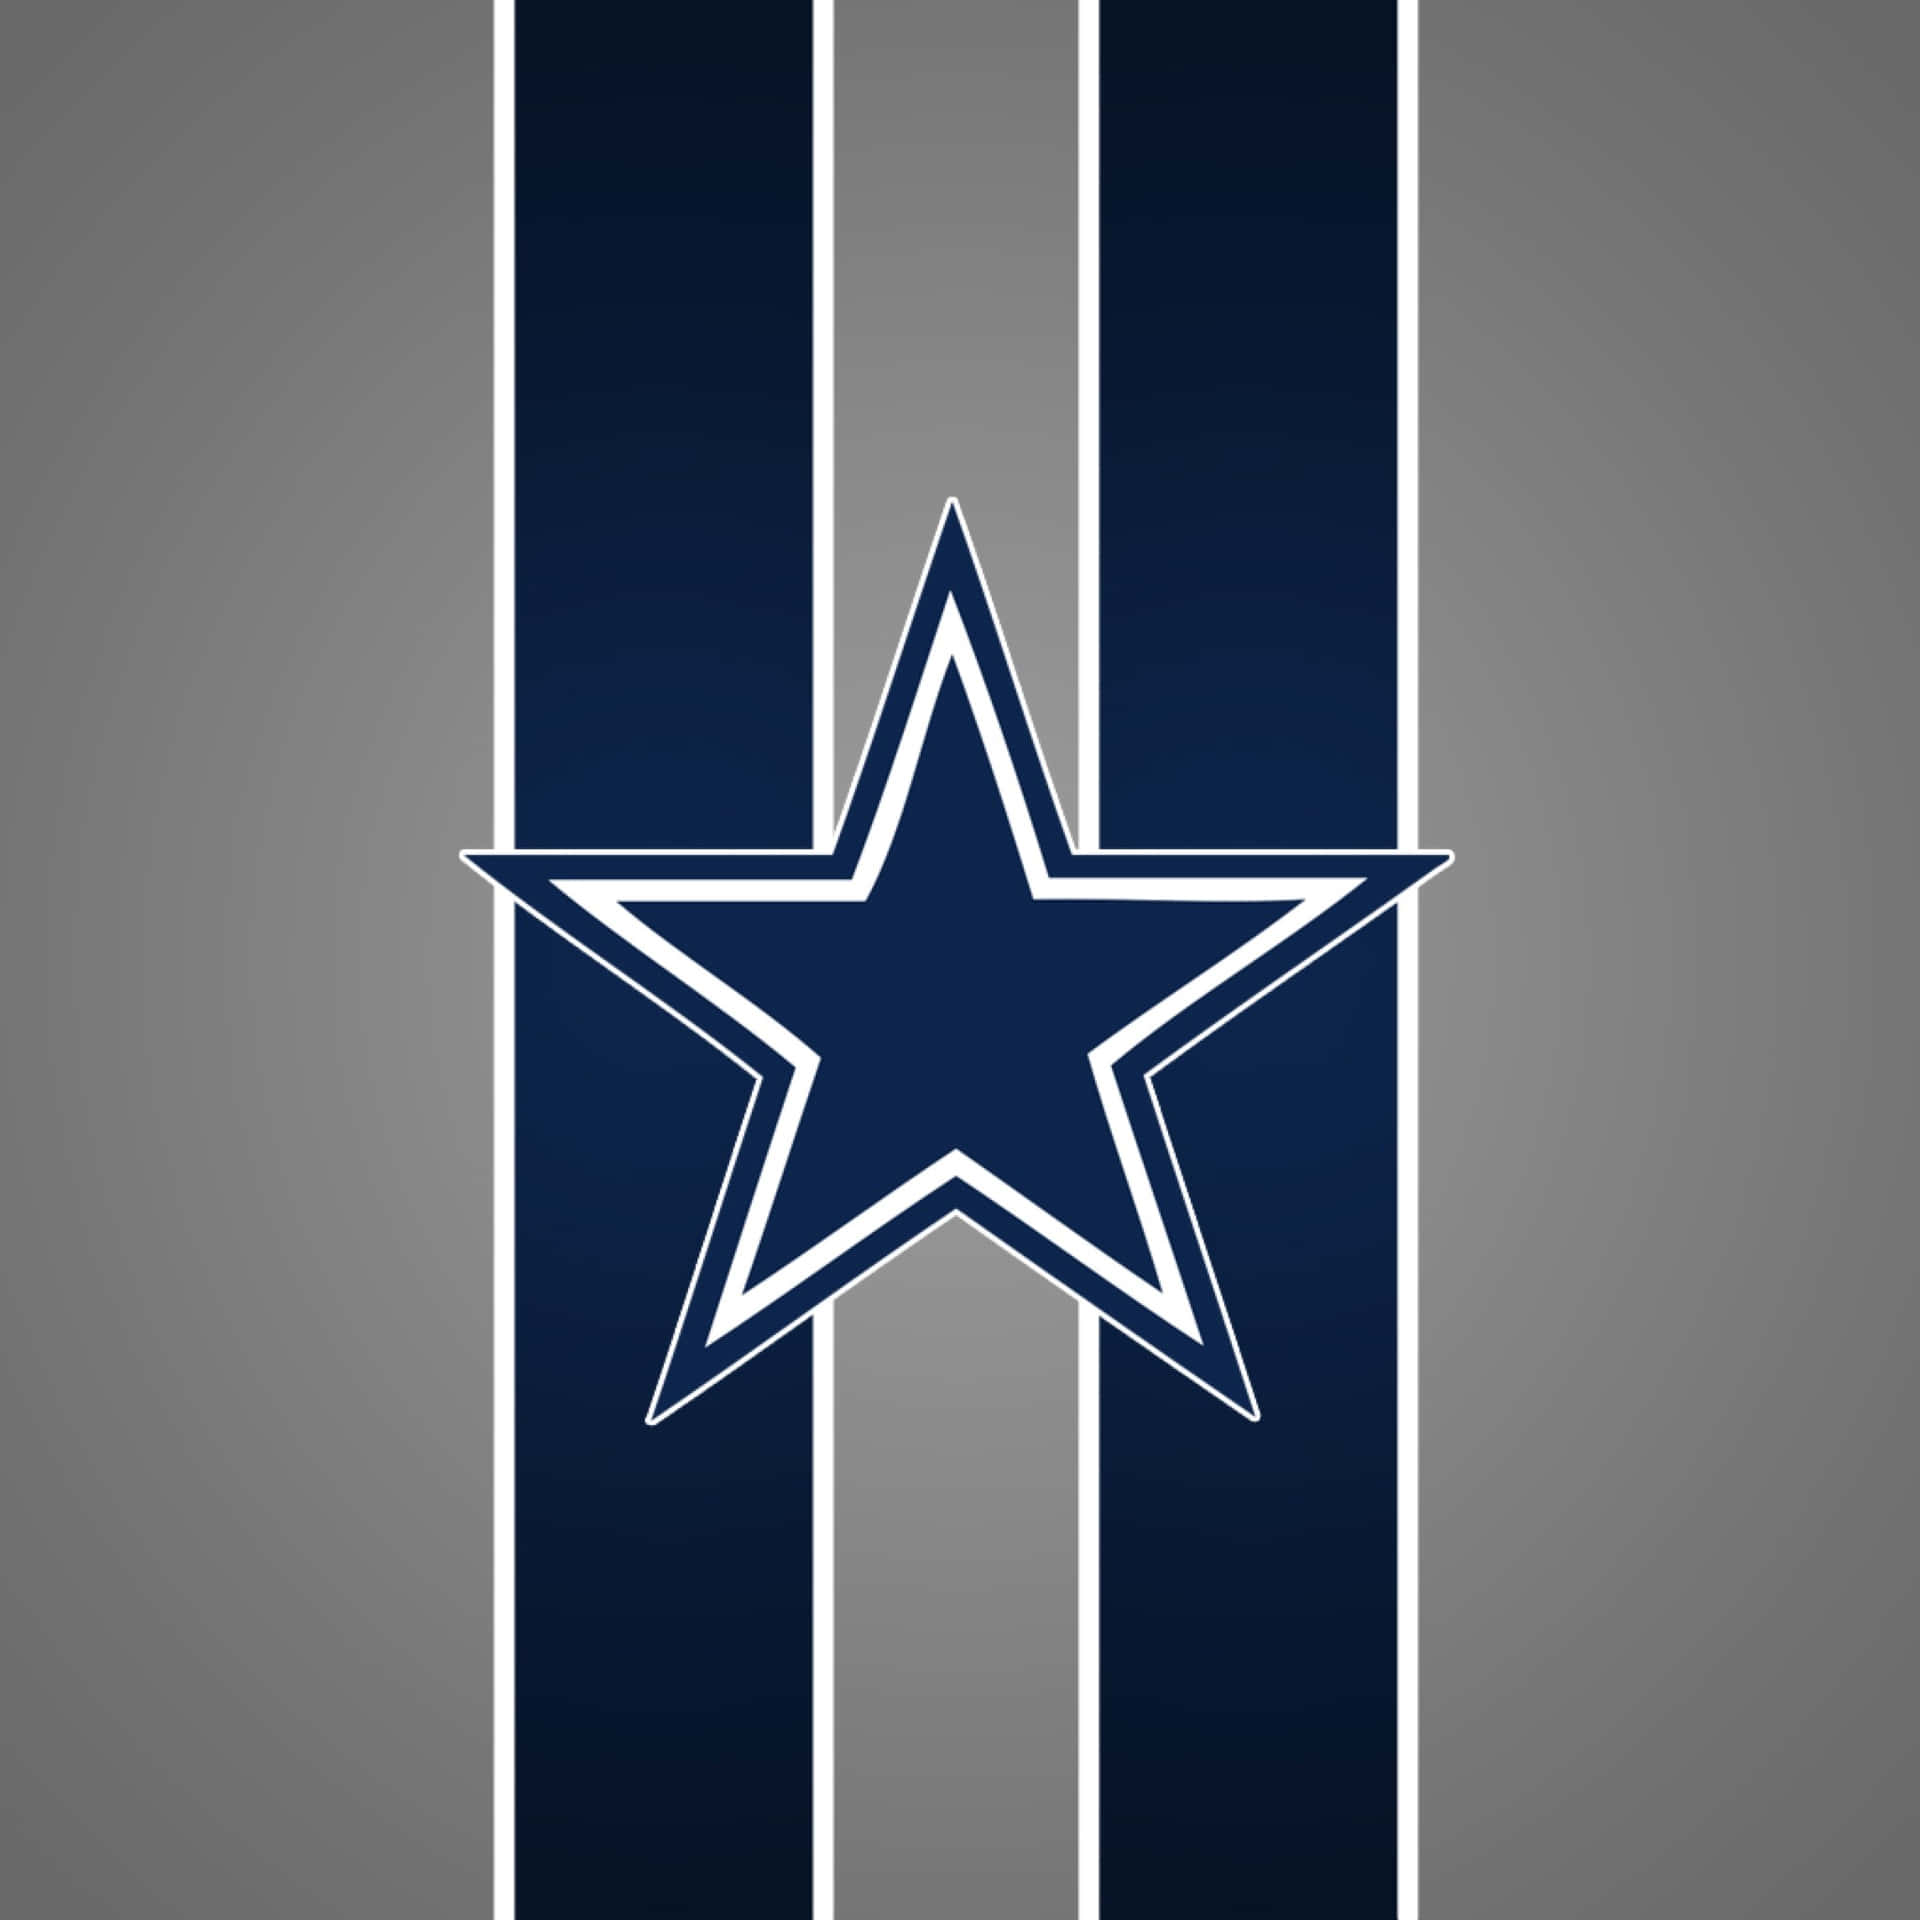 Show Your Fan Pride With The Dallas Cowboys Iphone Wallpaper